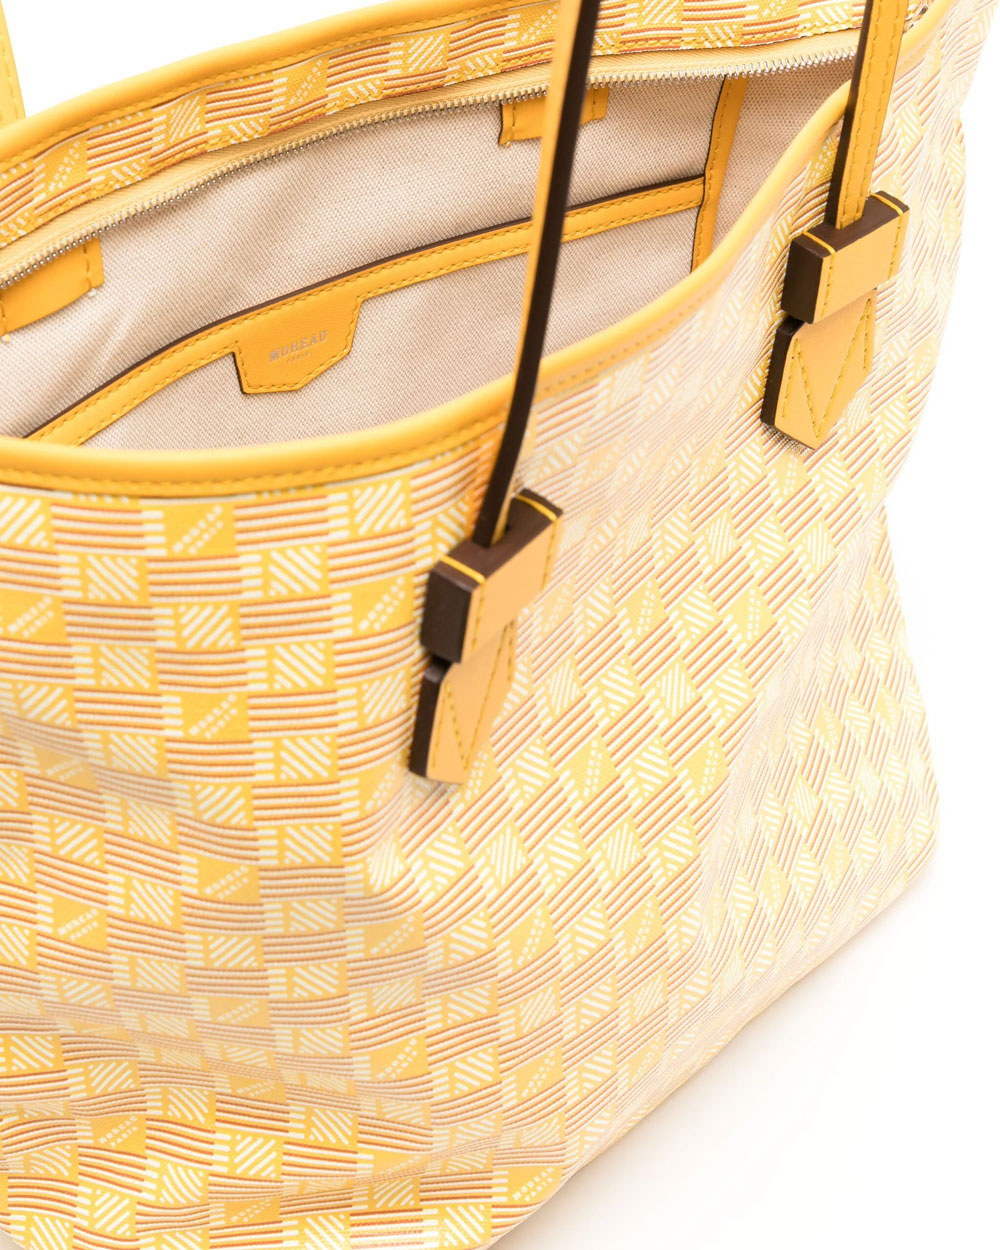 St Tropez Large Tote in Yellow